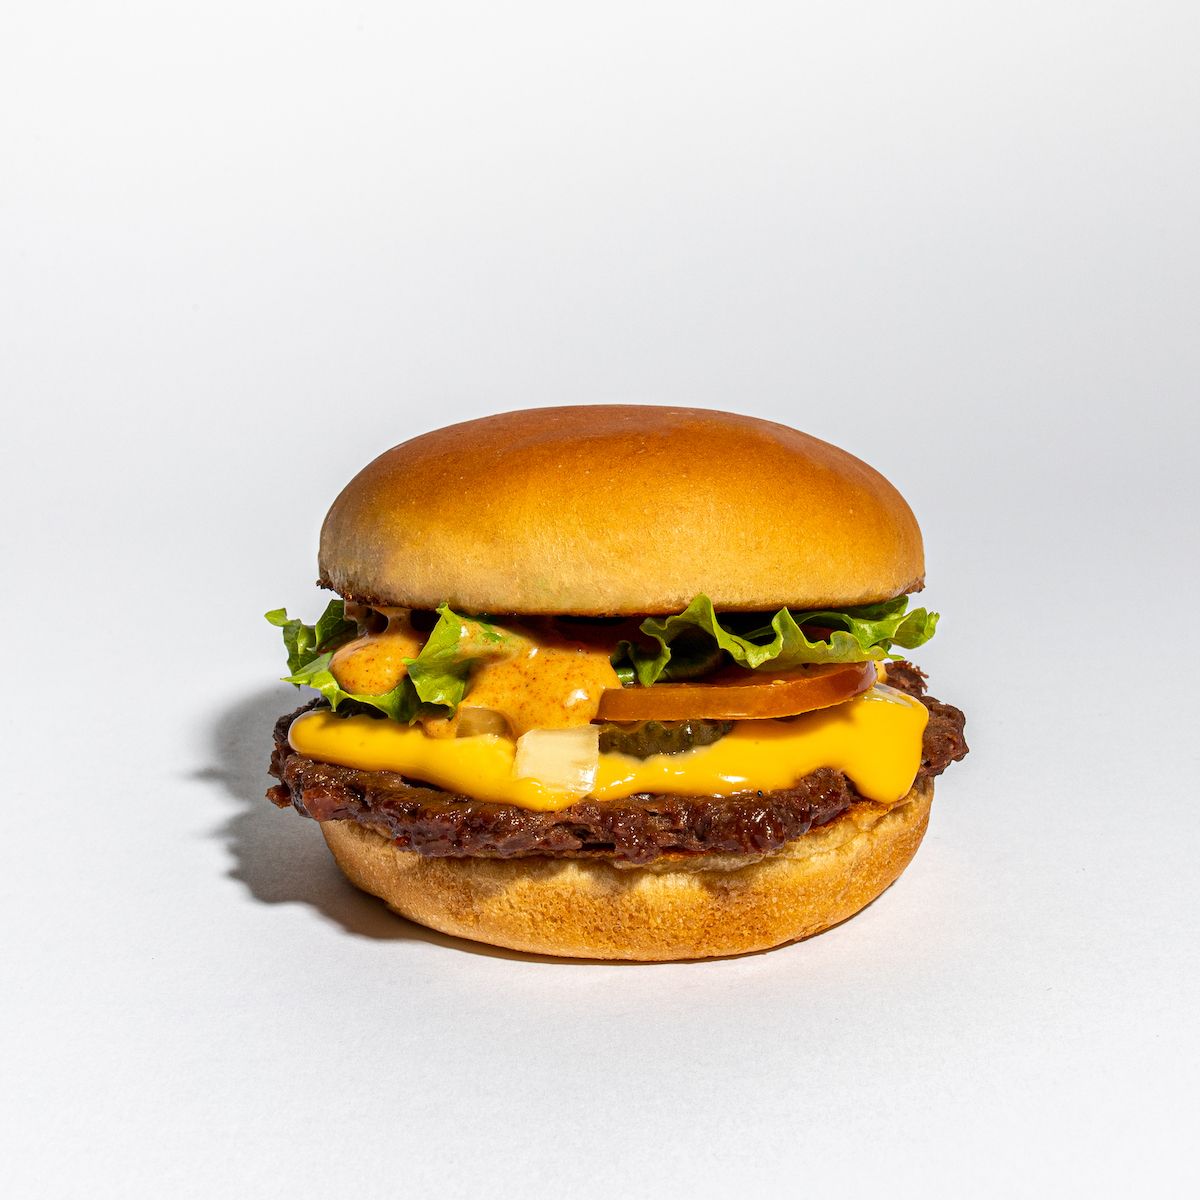 Start up receives investment of R$ 10 million and launches functional and vegan fast food